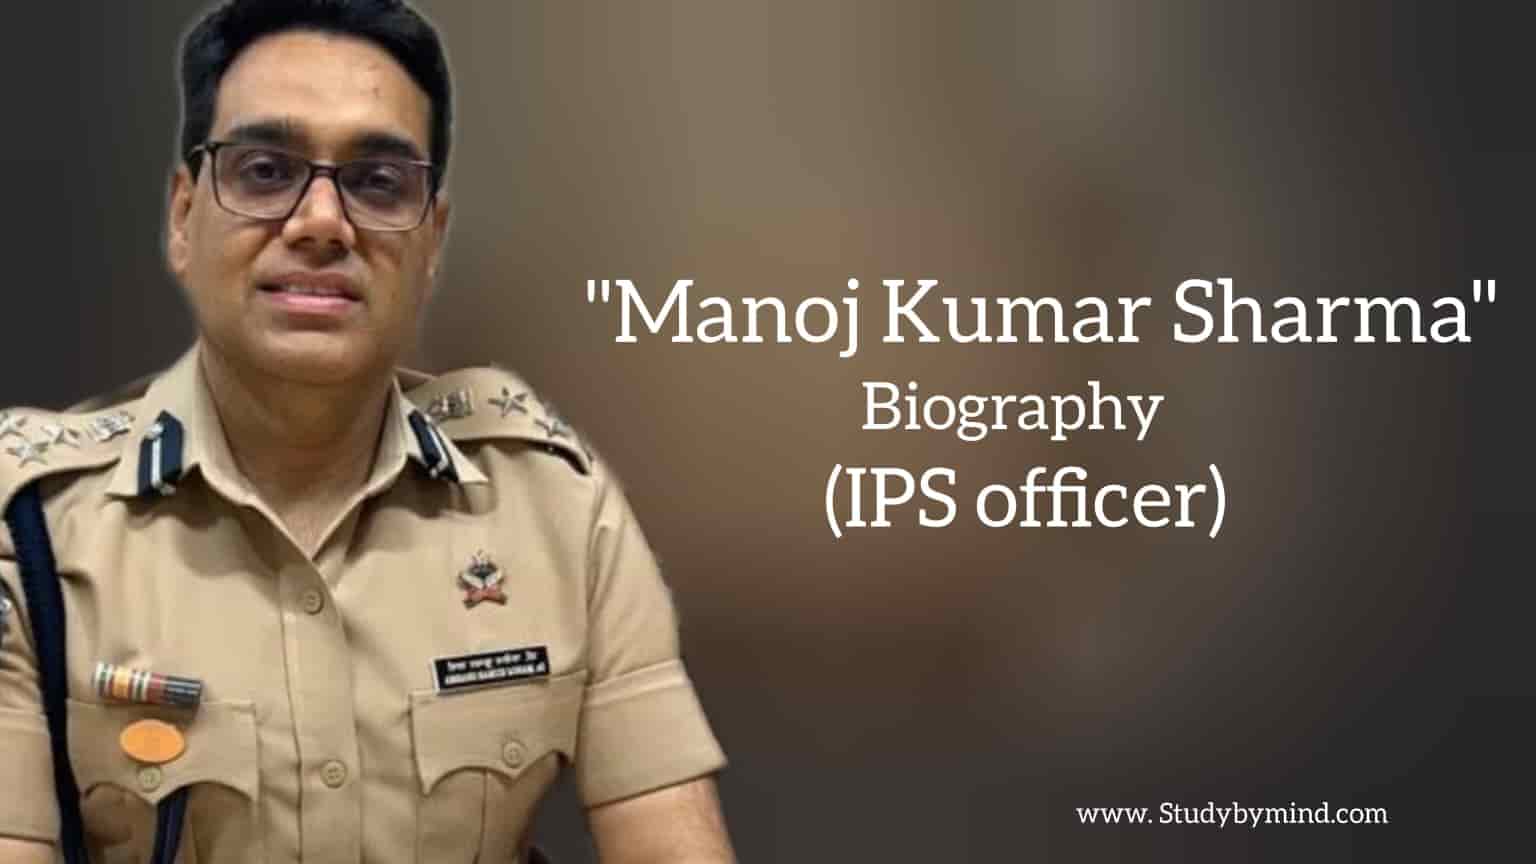 You are currently viewing Manoj kumar sharma biography in english (IPS Officer)